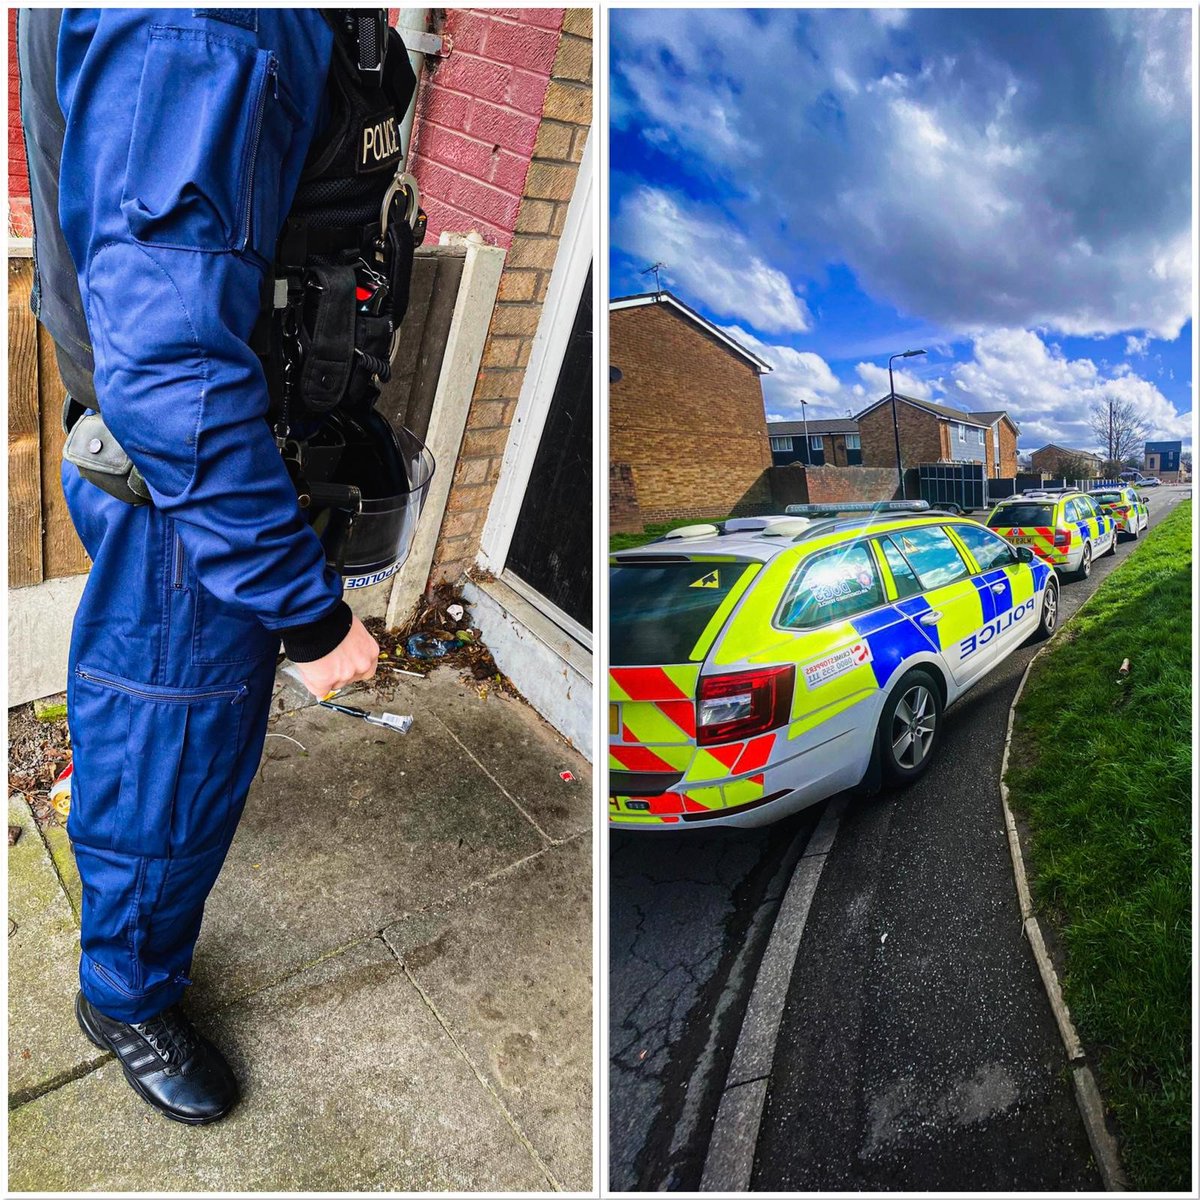 Trafford Neighbourhood officers have today successfully executed a warrant with GMP dog handlers at an address in Sale for a dangerous dog. I encourage you to all remind yourselves of the new legislation around dangerous dogs that was introduced this year 2024.